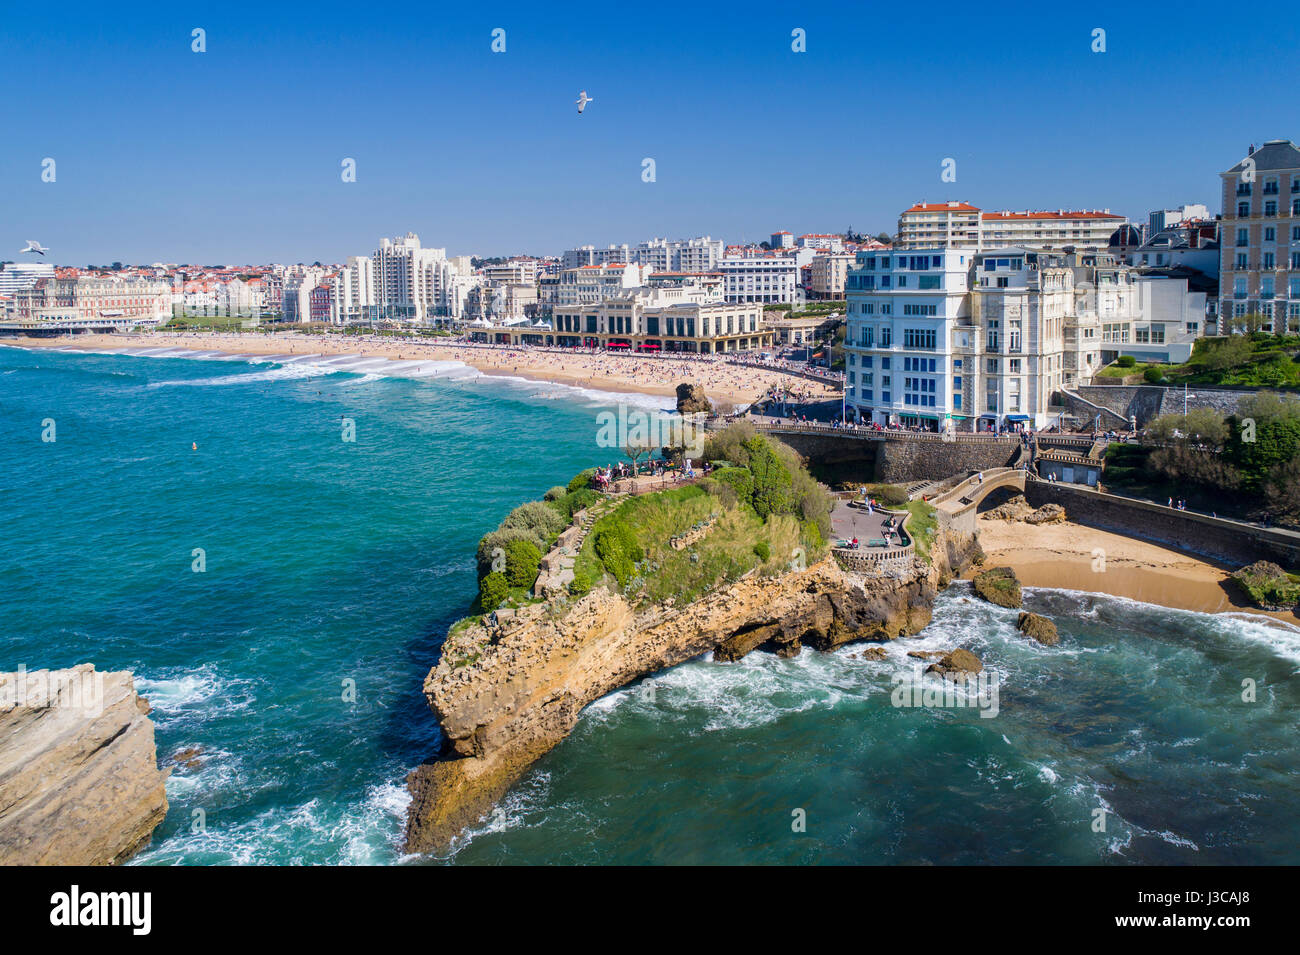 Biarritz is a city on the Bay of Biscay, on the Atlantic coast in the Pyrénées-Atlantiques department of Aquitaine region in southwestern France. Stock Photo